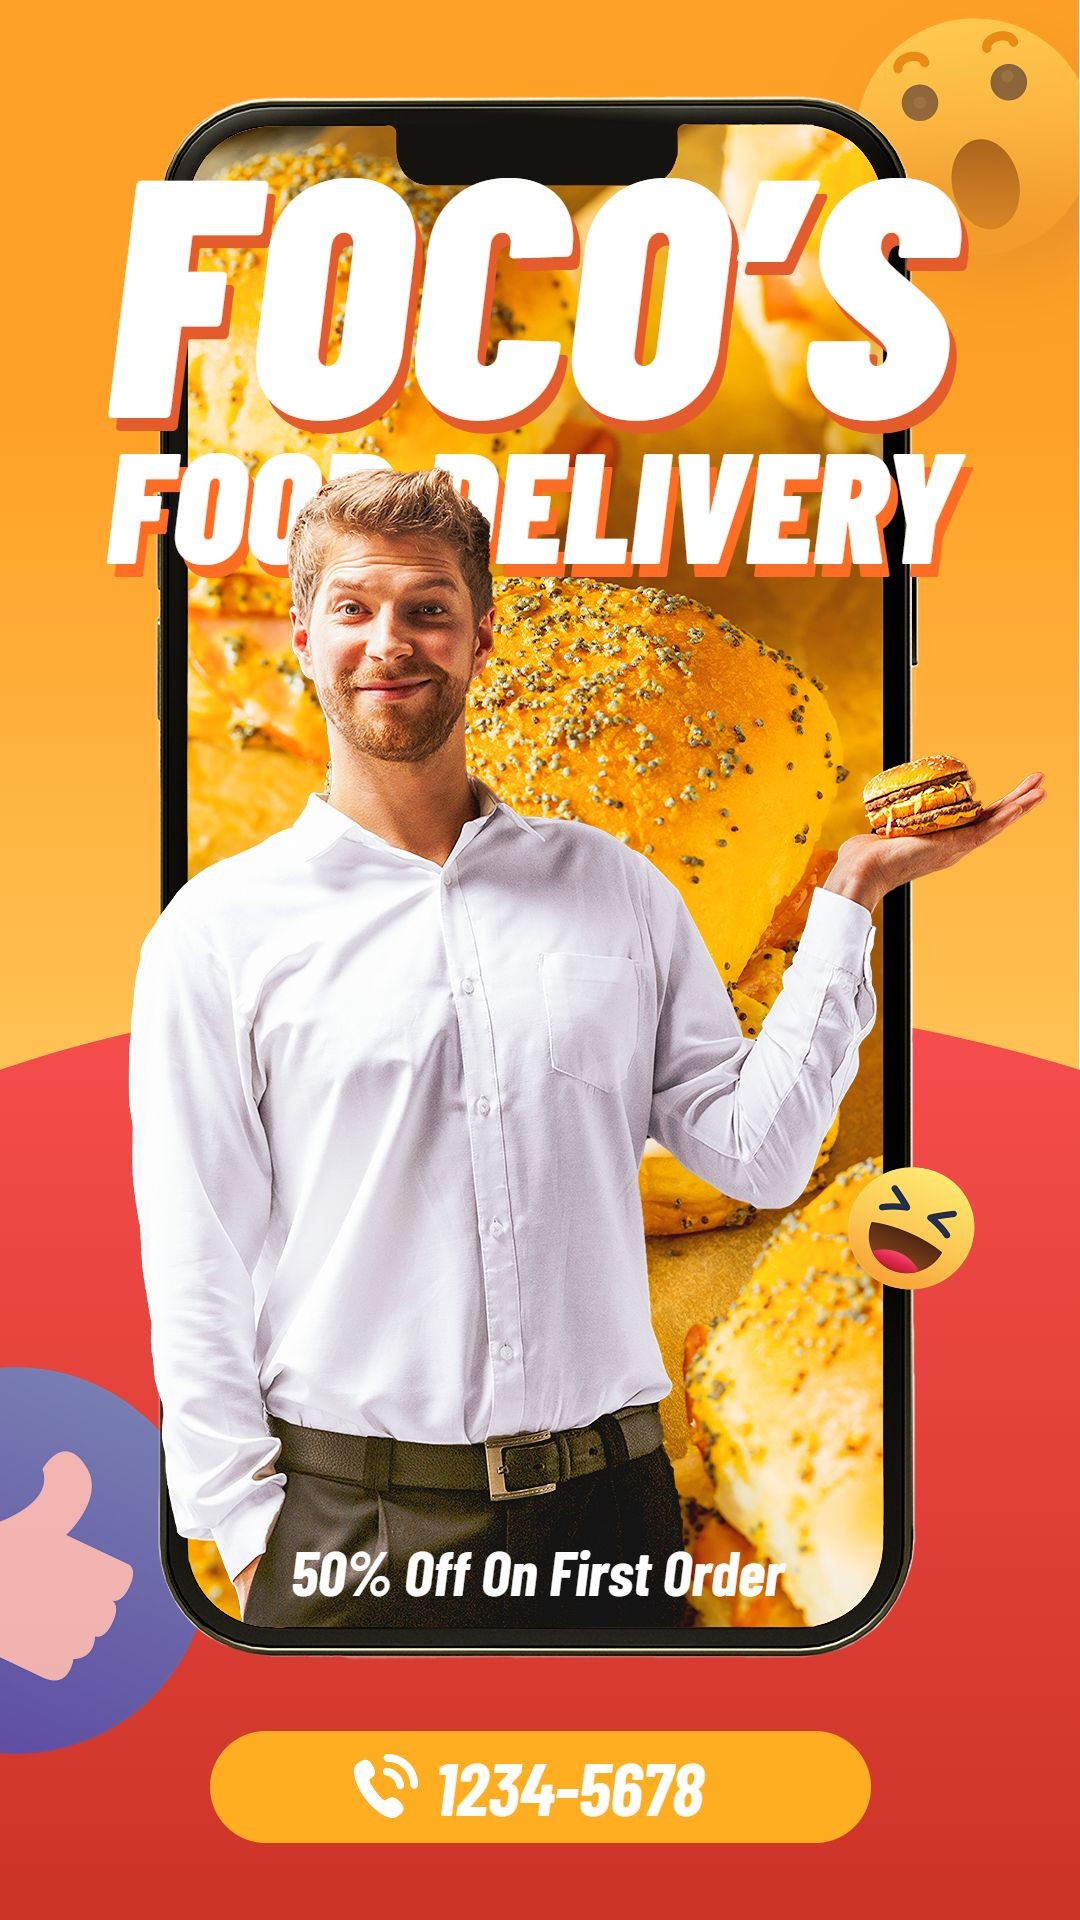 Hamburger Fast Food Delivery Discount Promo Smart Phone Interface Simulation Creative Campaign Marketing Ecommerce Story